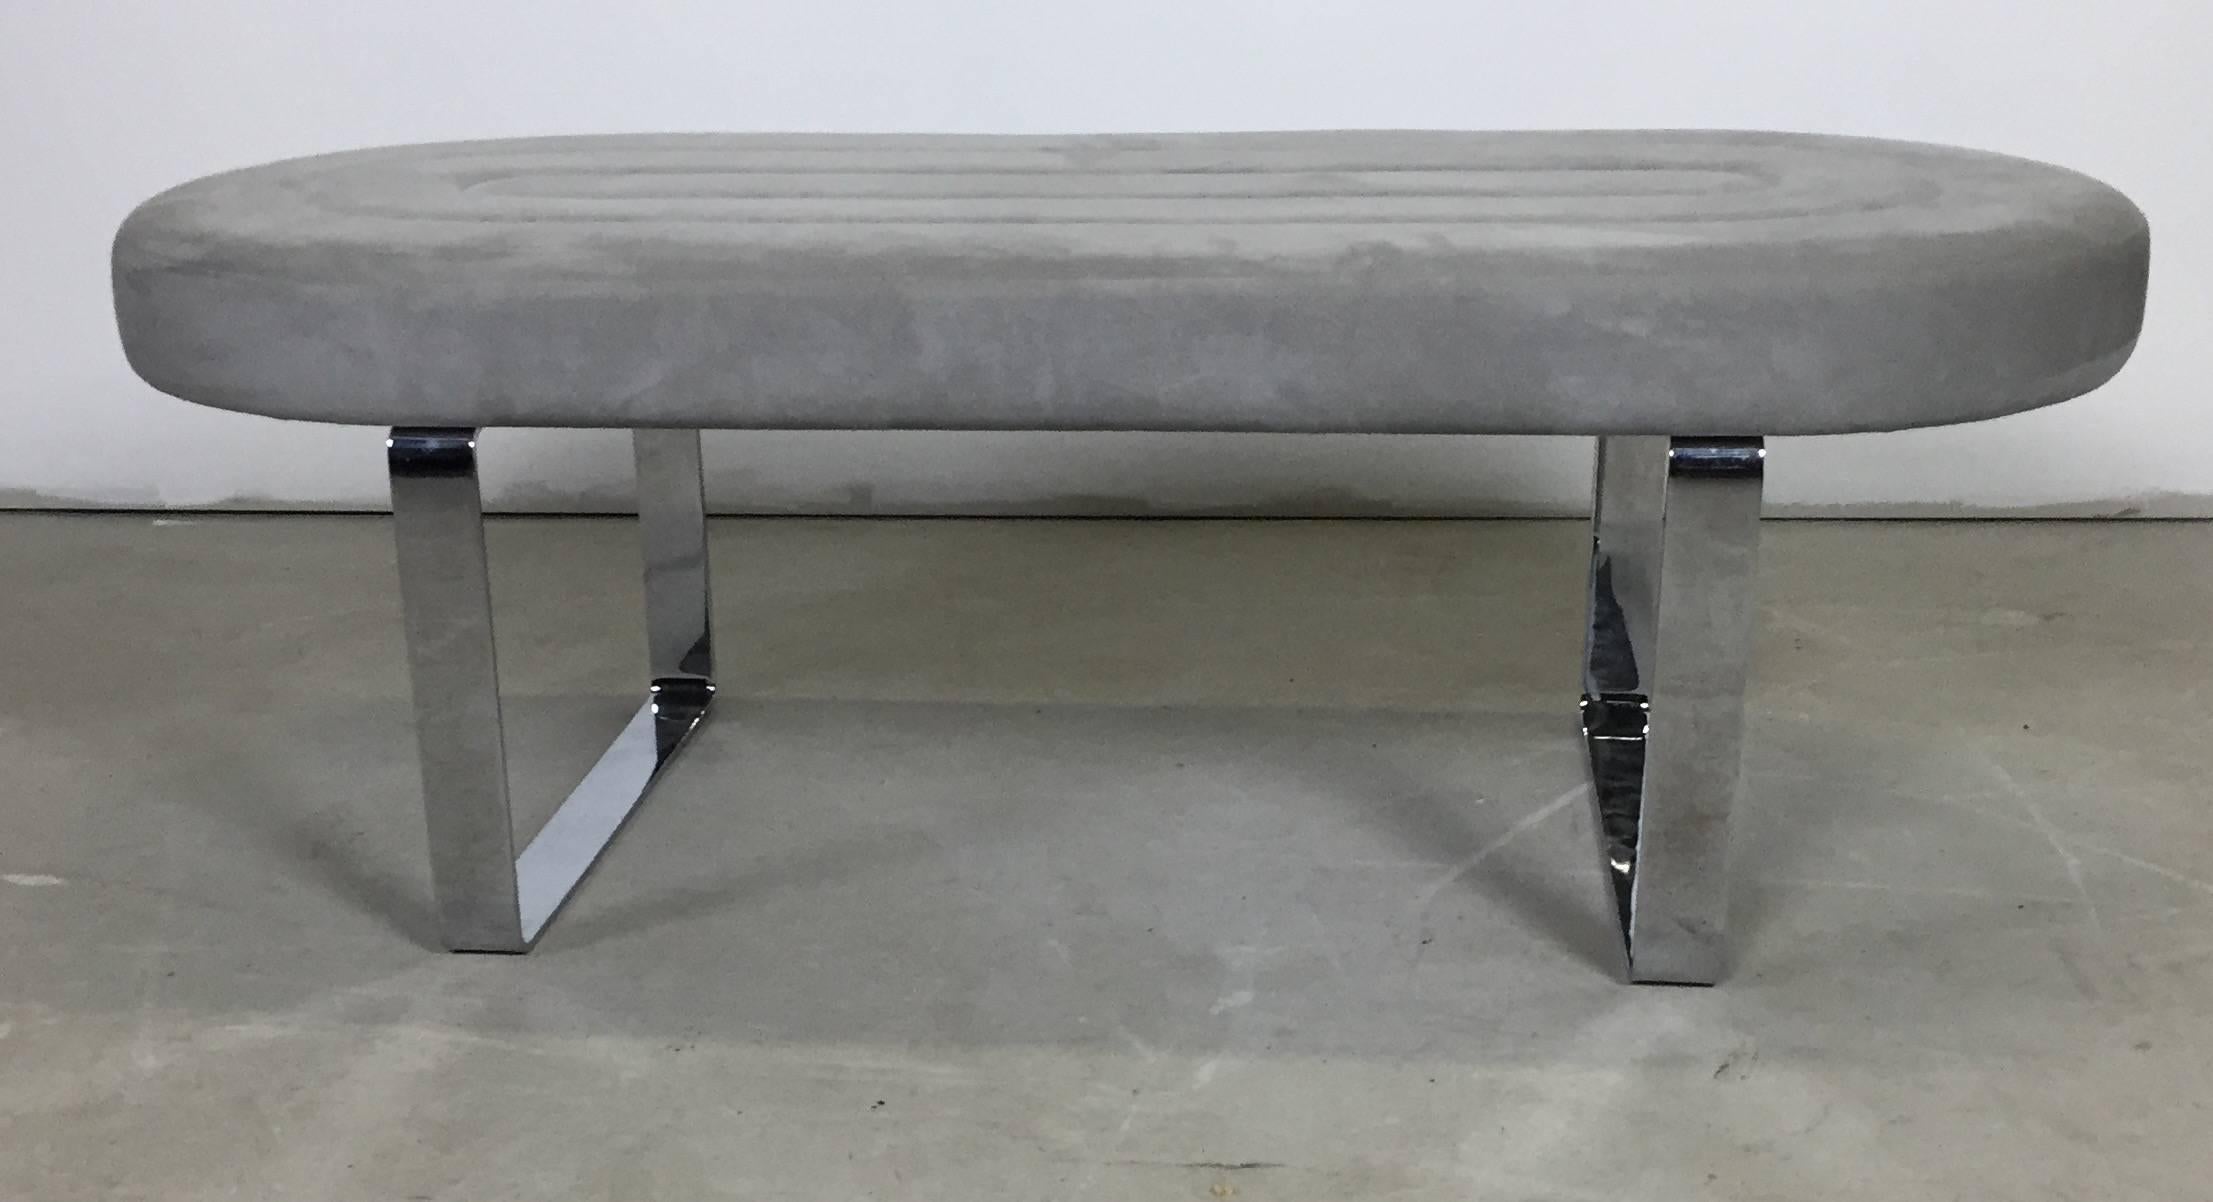 A bench upholstered in fine cropped gray velvet with concentric oval motif. Polished wide chrome band legs.